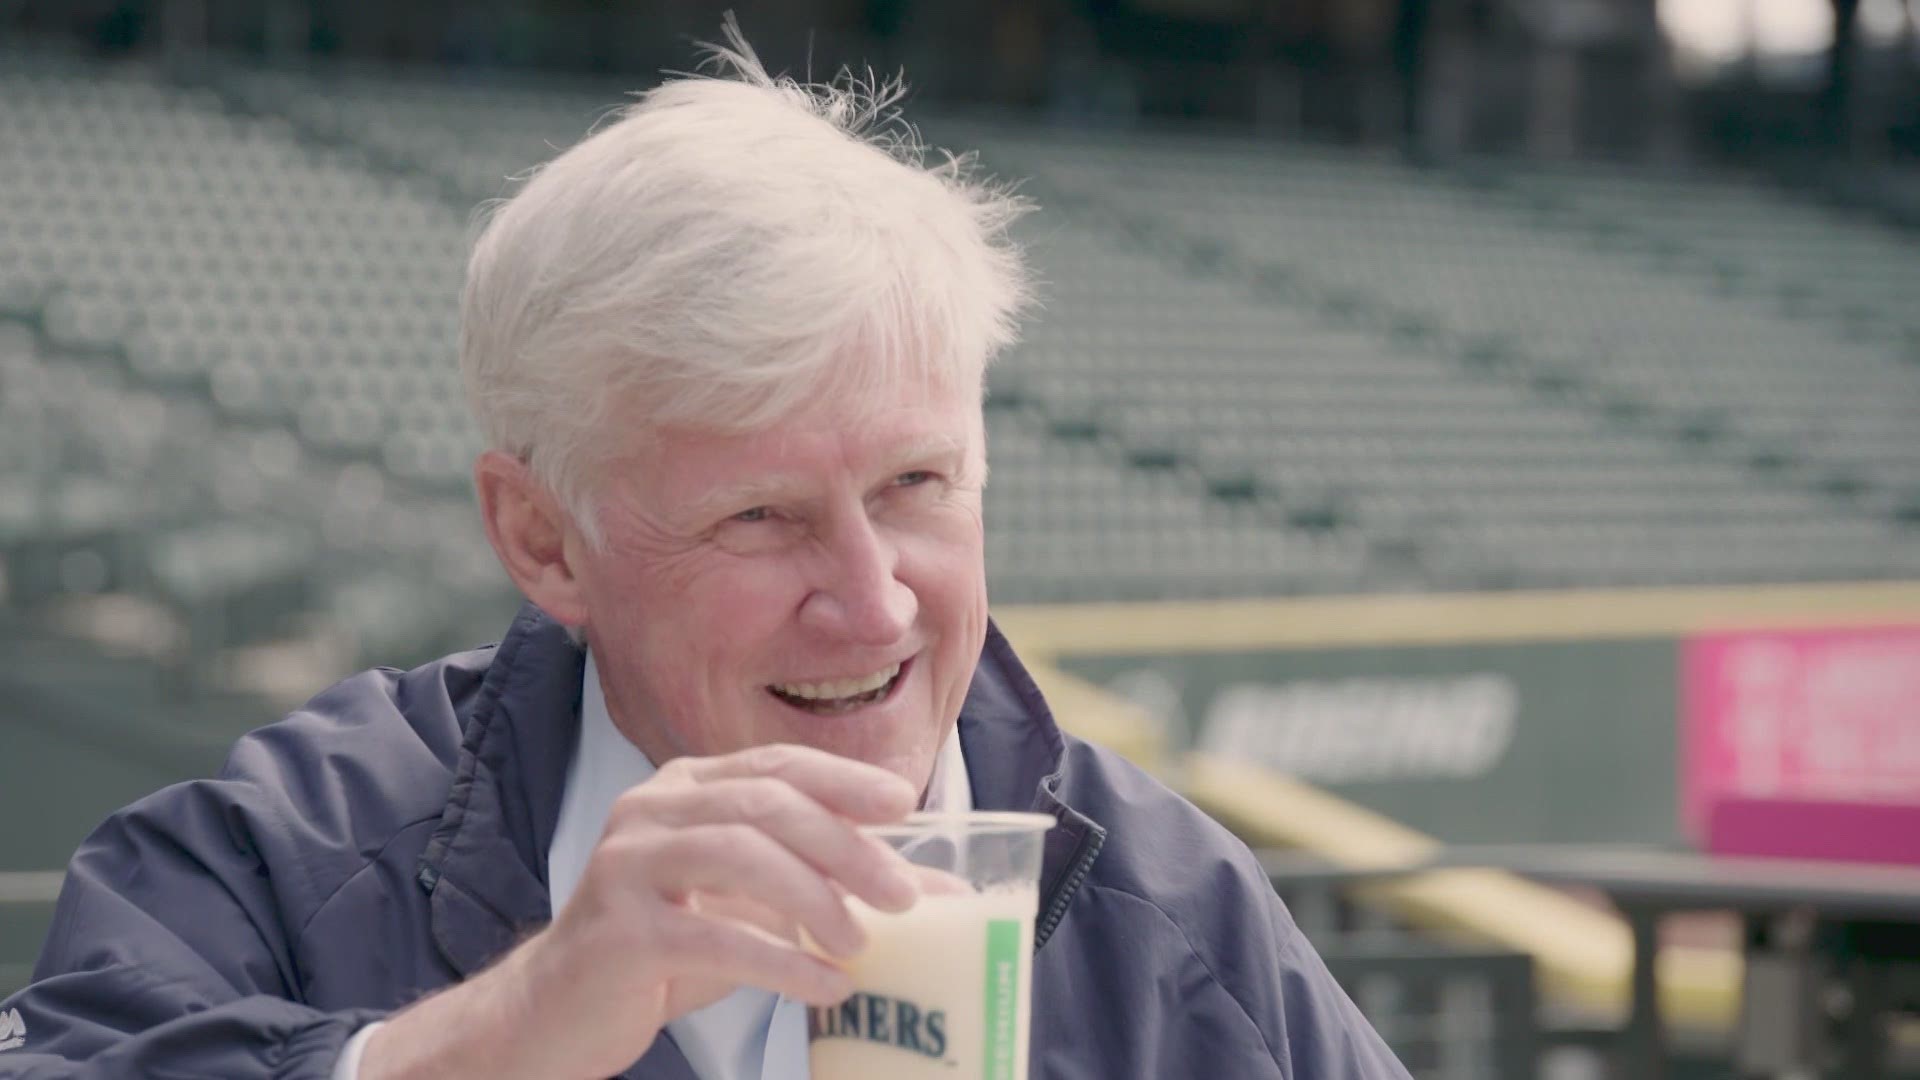 Chris sits down with Seattle Mariners owner John Stanton to discuss the pandemic, Kevin Mather and the likelihood of a playoff appearance soon.